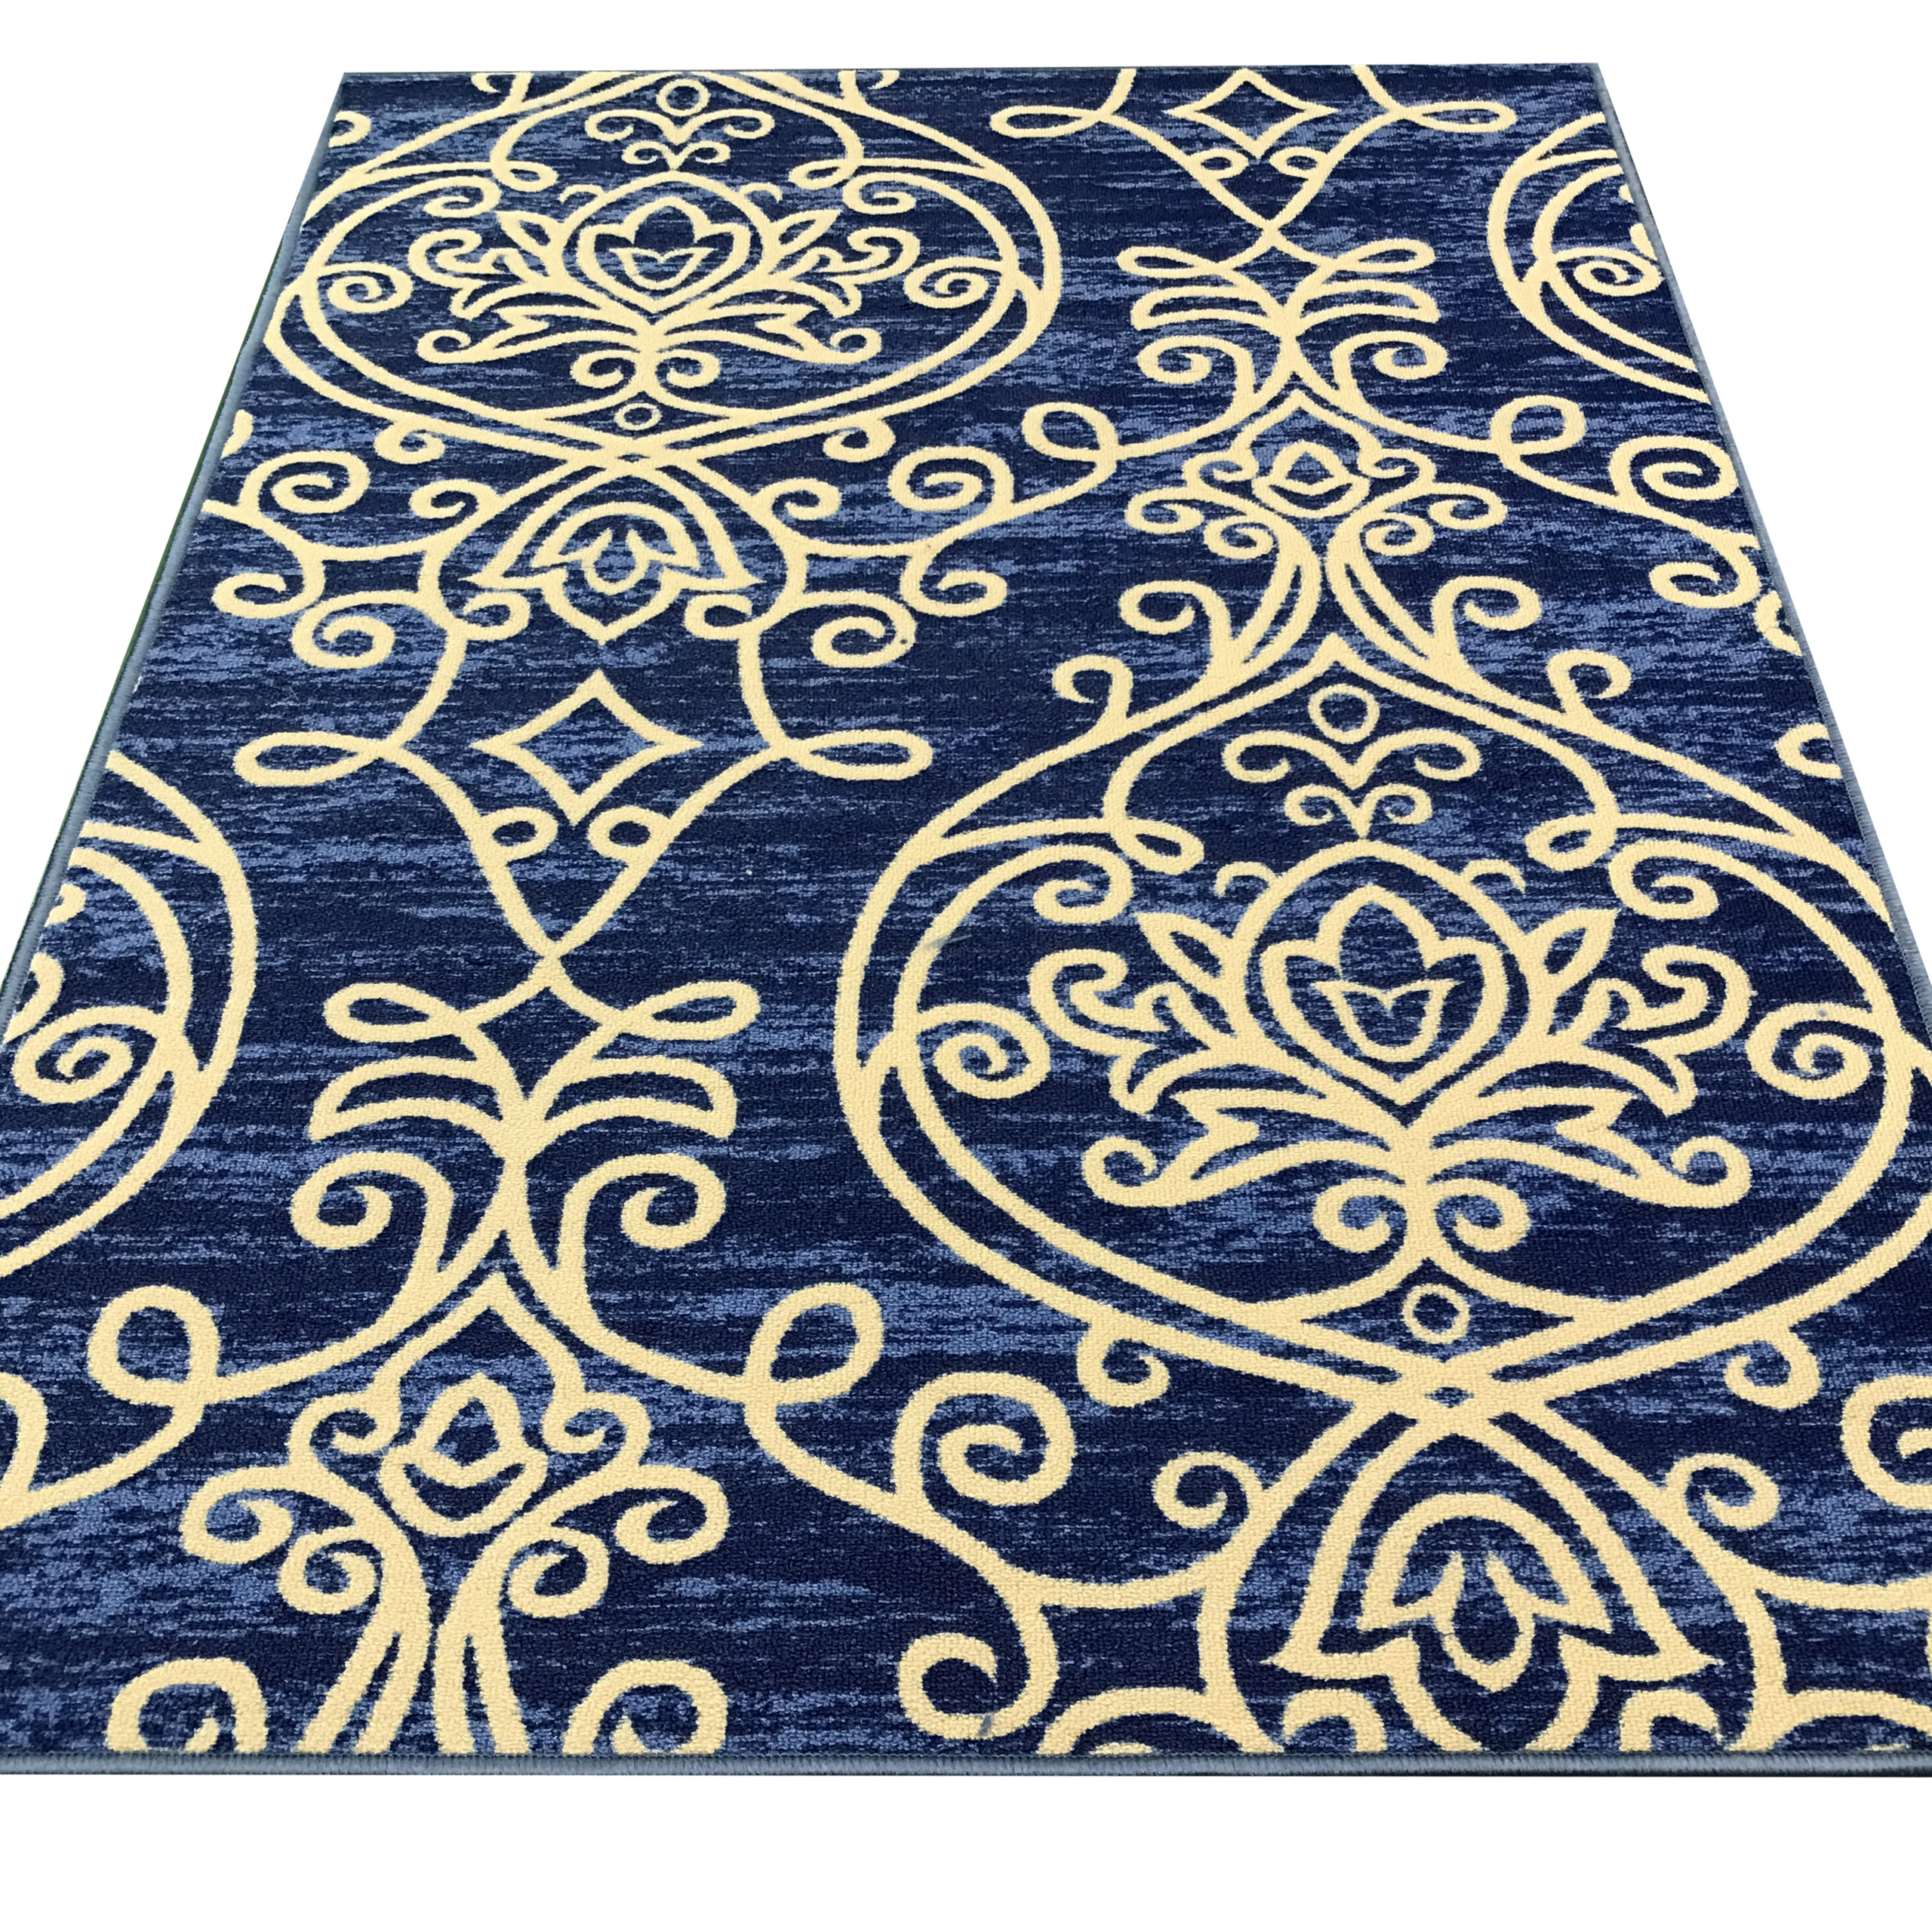 Rubber Backed Area Rugs Visualhunt, Rubber Backed Rug